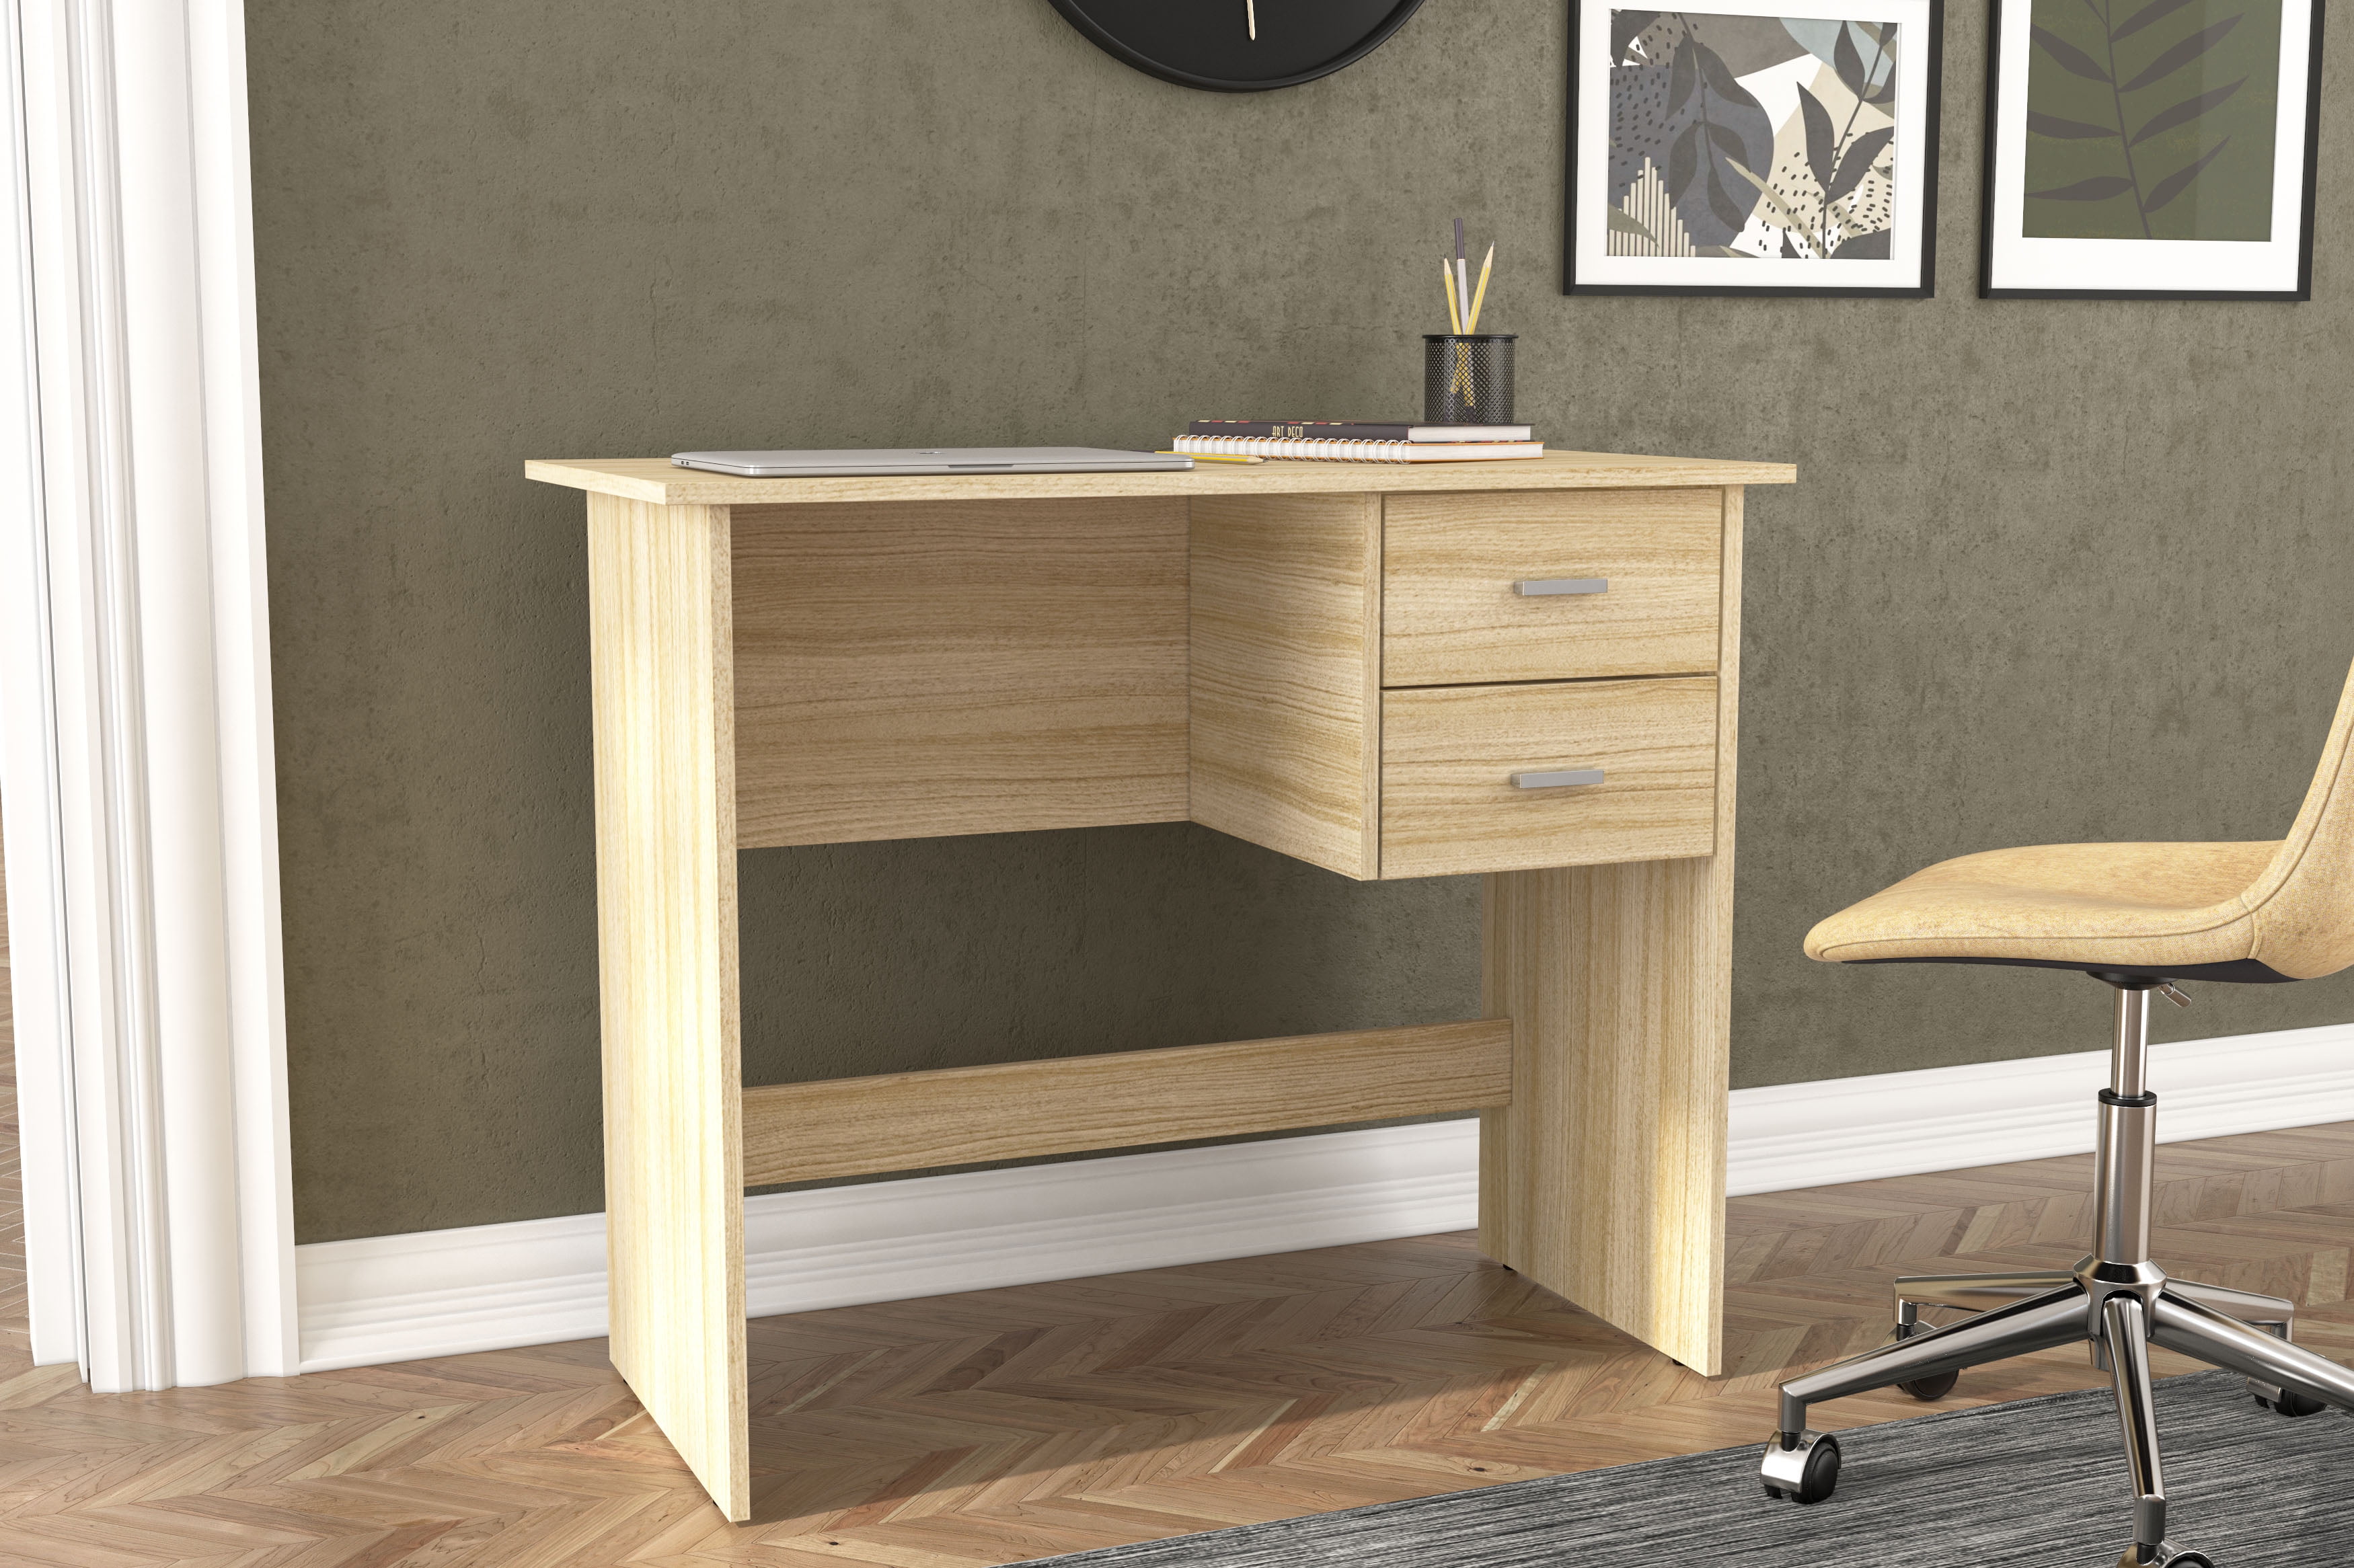 35.5 Budapest Desk 2 with in. Oak Polifurniture Writing Drawers